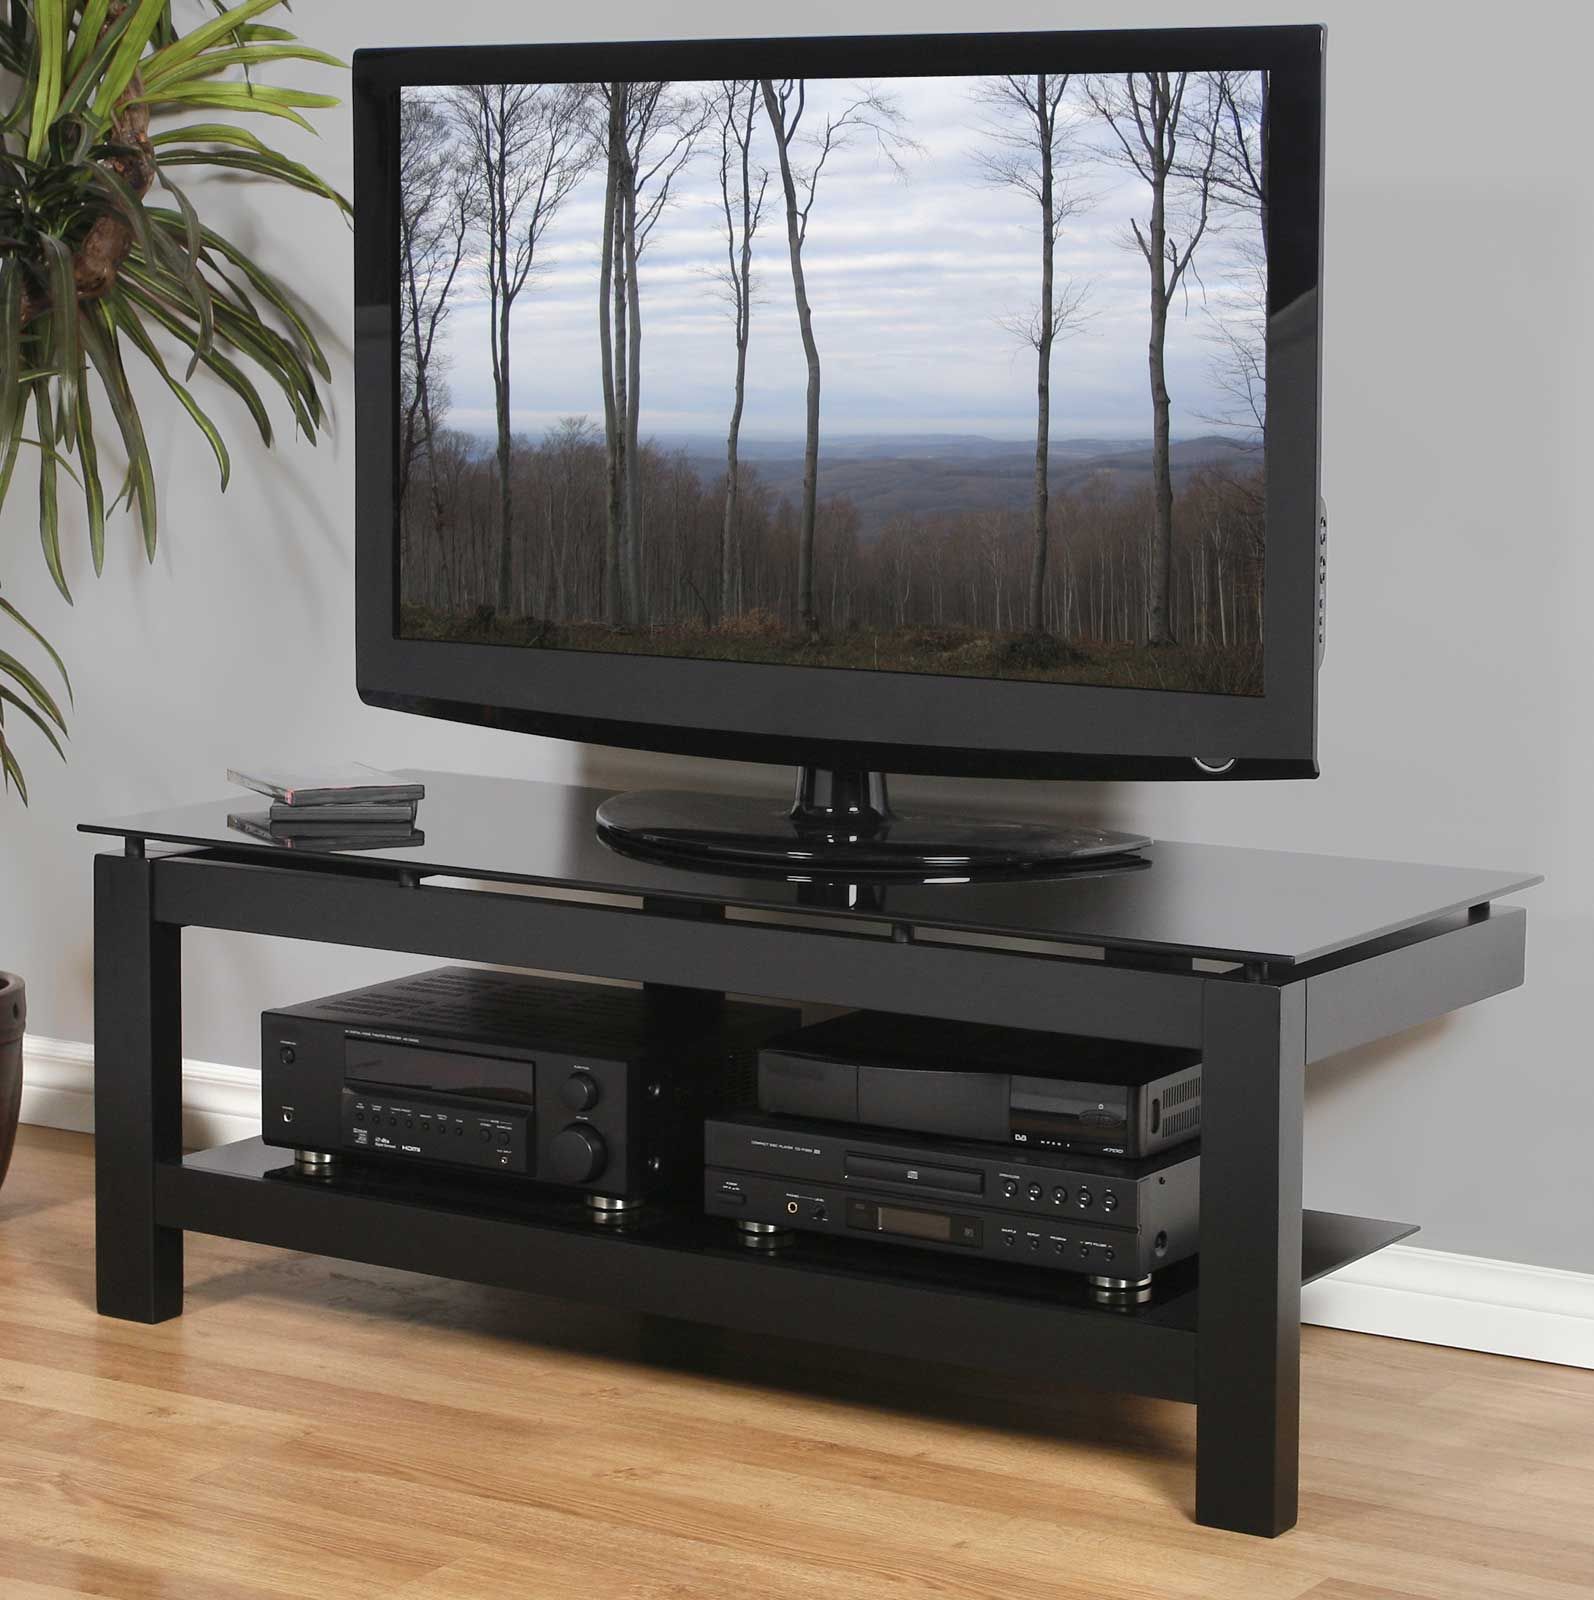 Low Profile 50 Inch Tv Stand – Black In Tv Stands Within Modern Black Floor Glass Tv Stands For Tvs Up To 70 Inch (View 11 of 15)